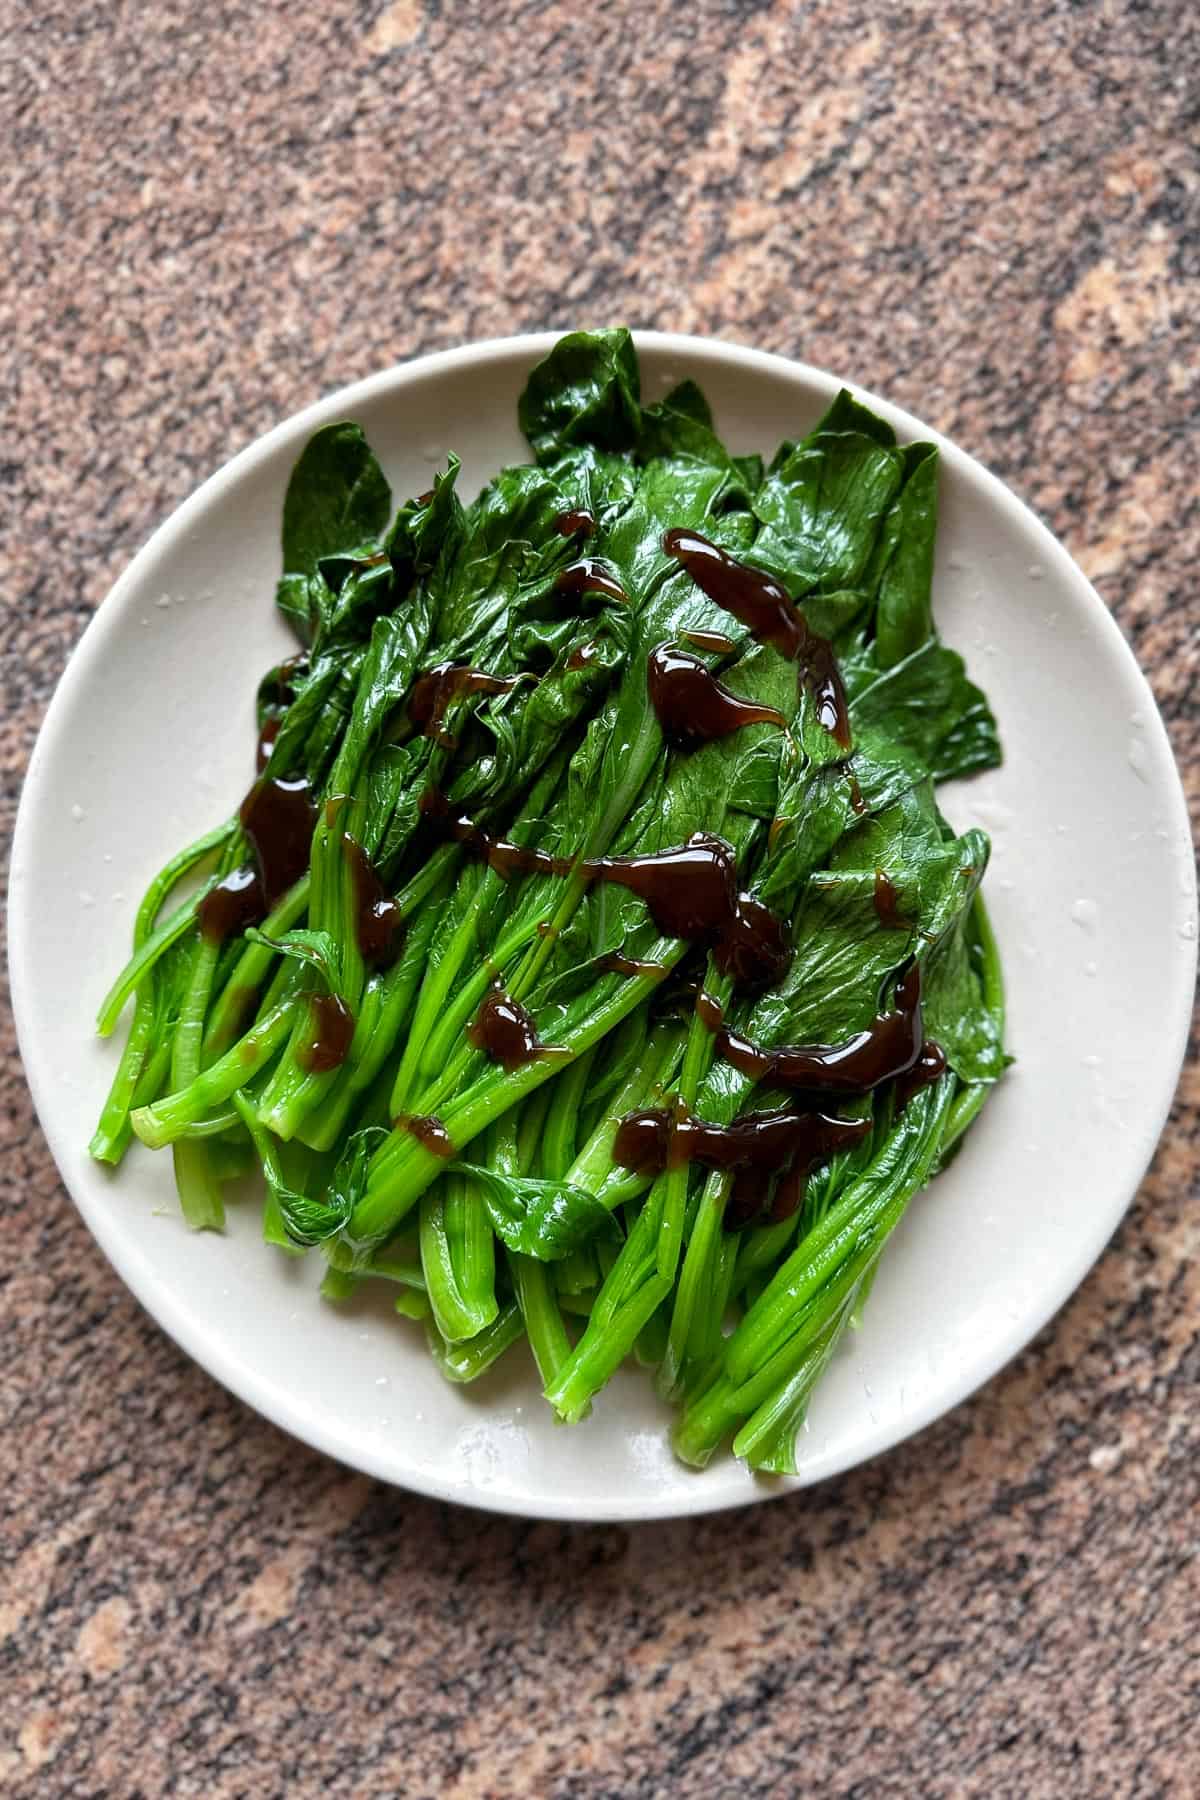 Choy sum, plated and ready to serve with a drizzle of oyster sauce.